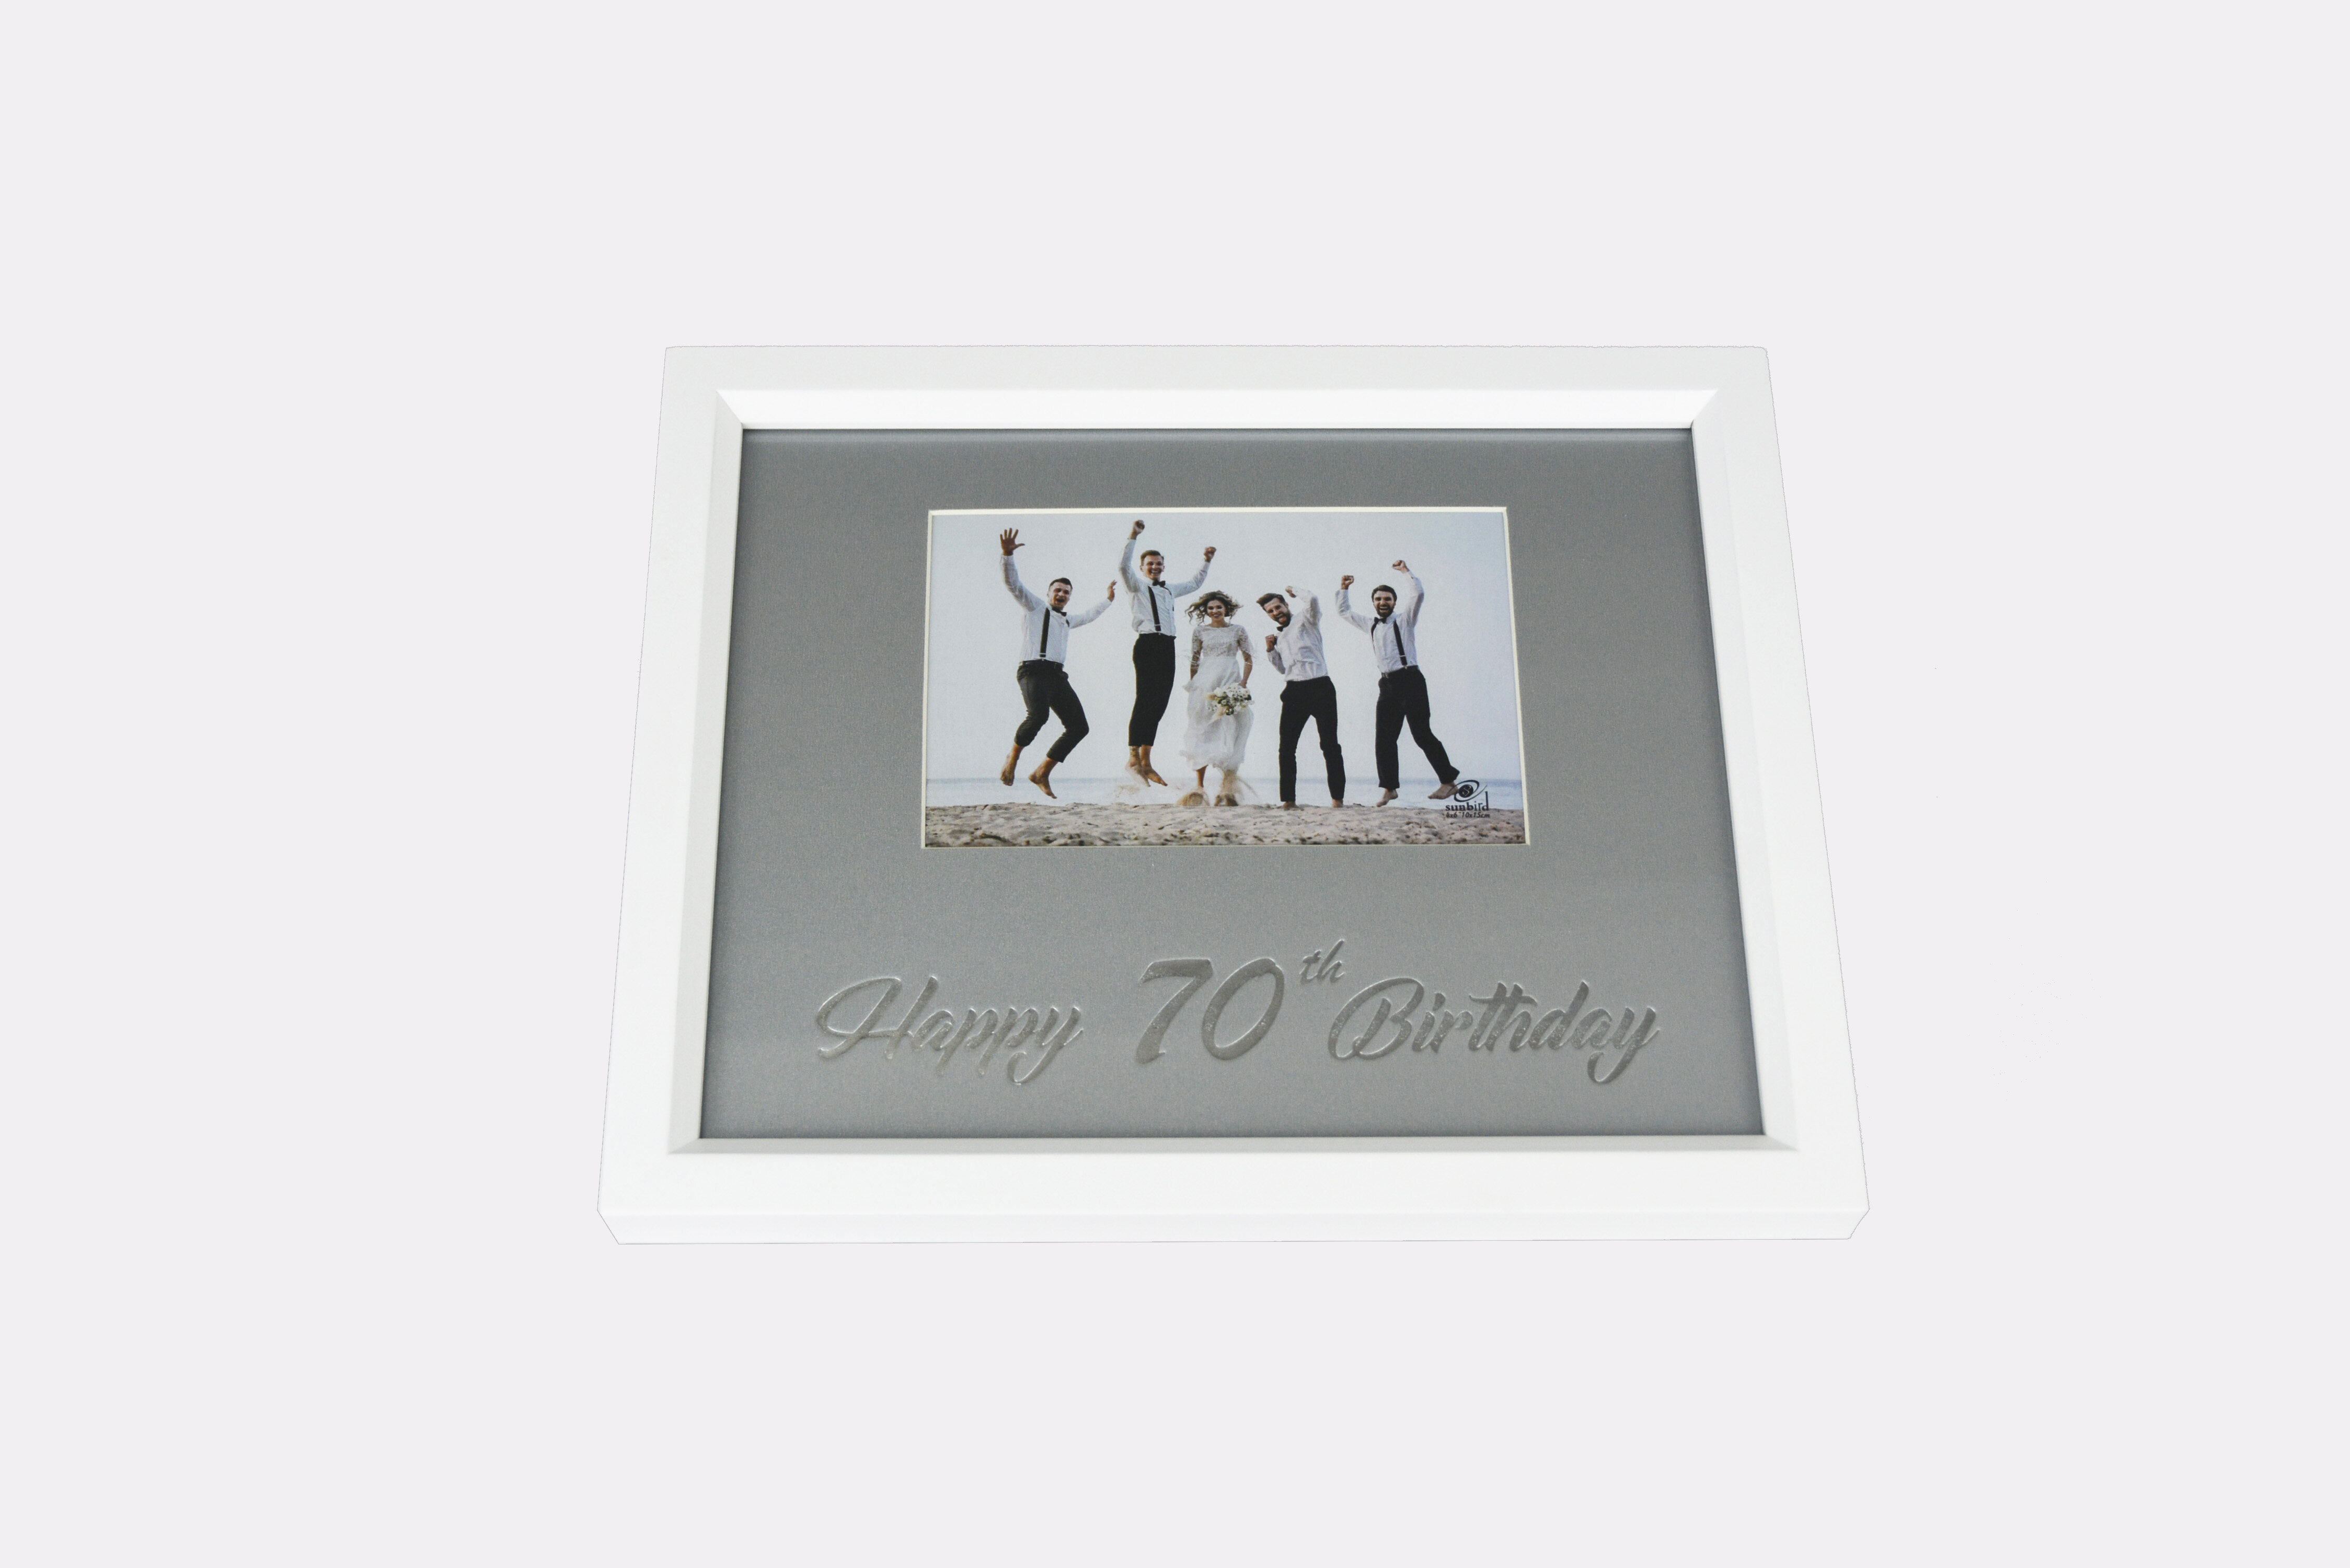 Ages of Happy 70th Birthday 4x6" wooden photo frame with foil silver fonts